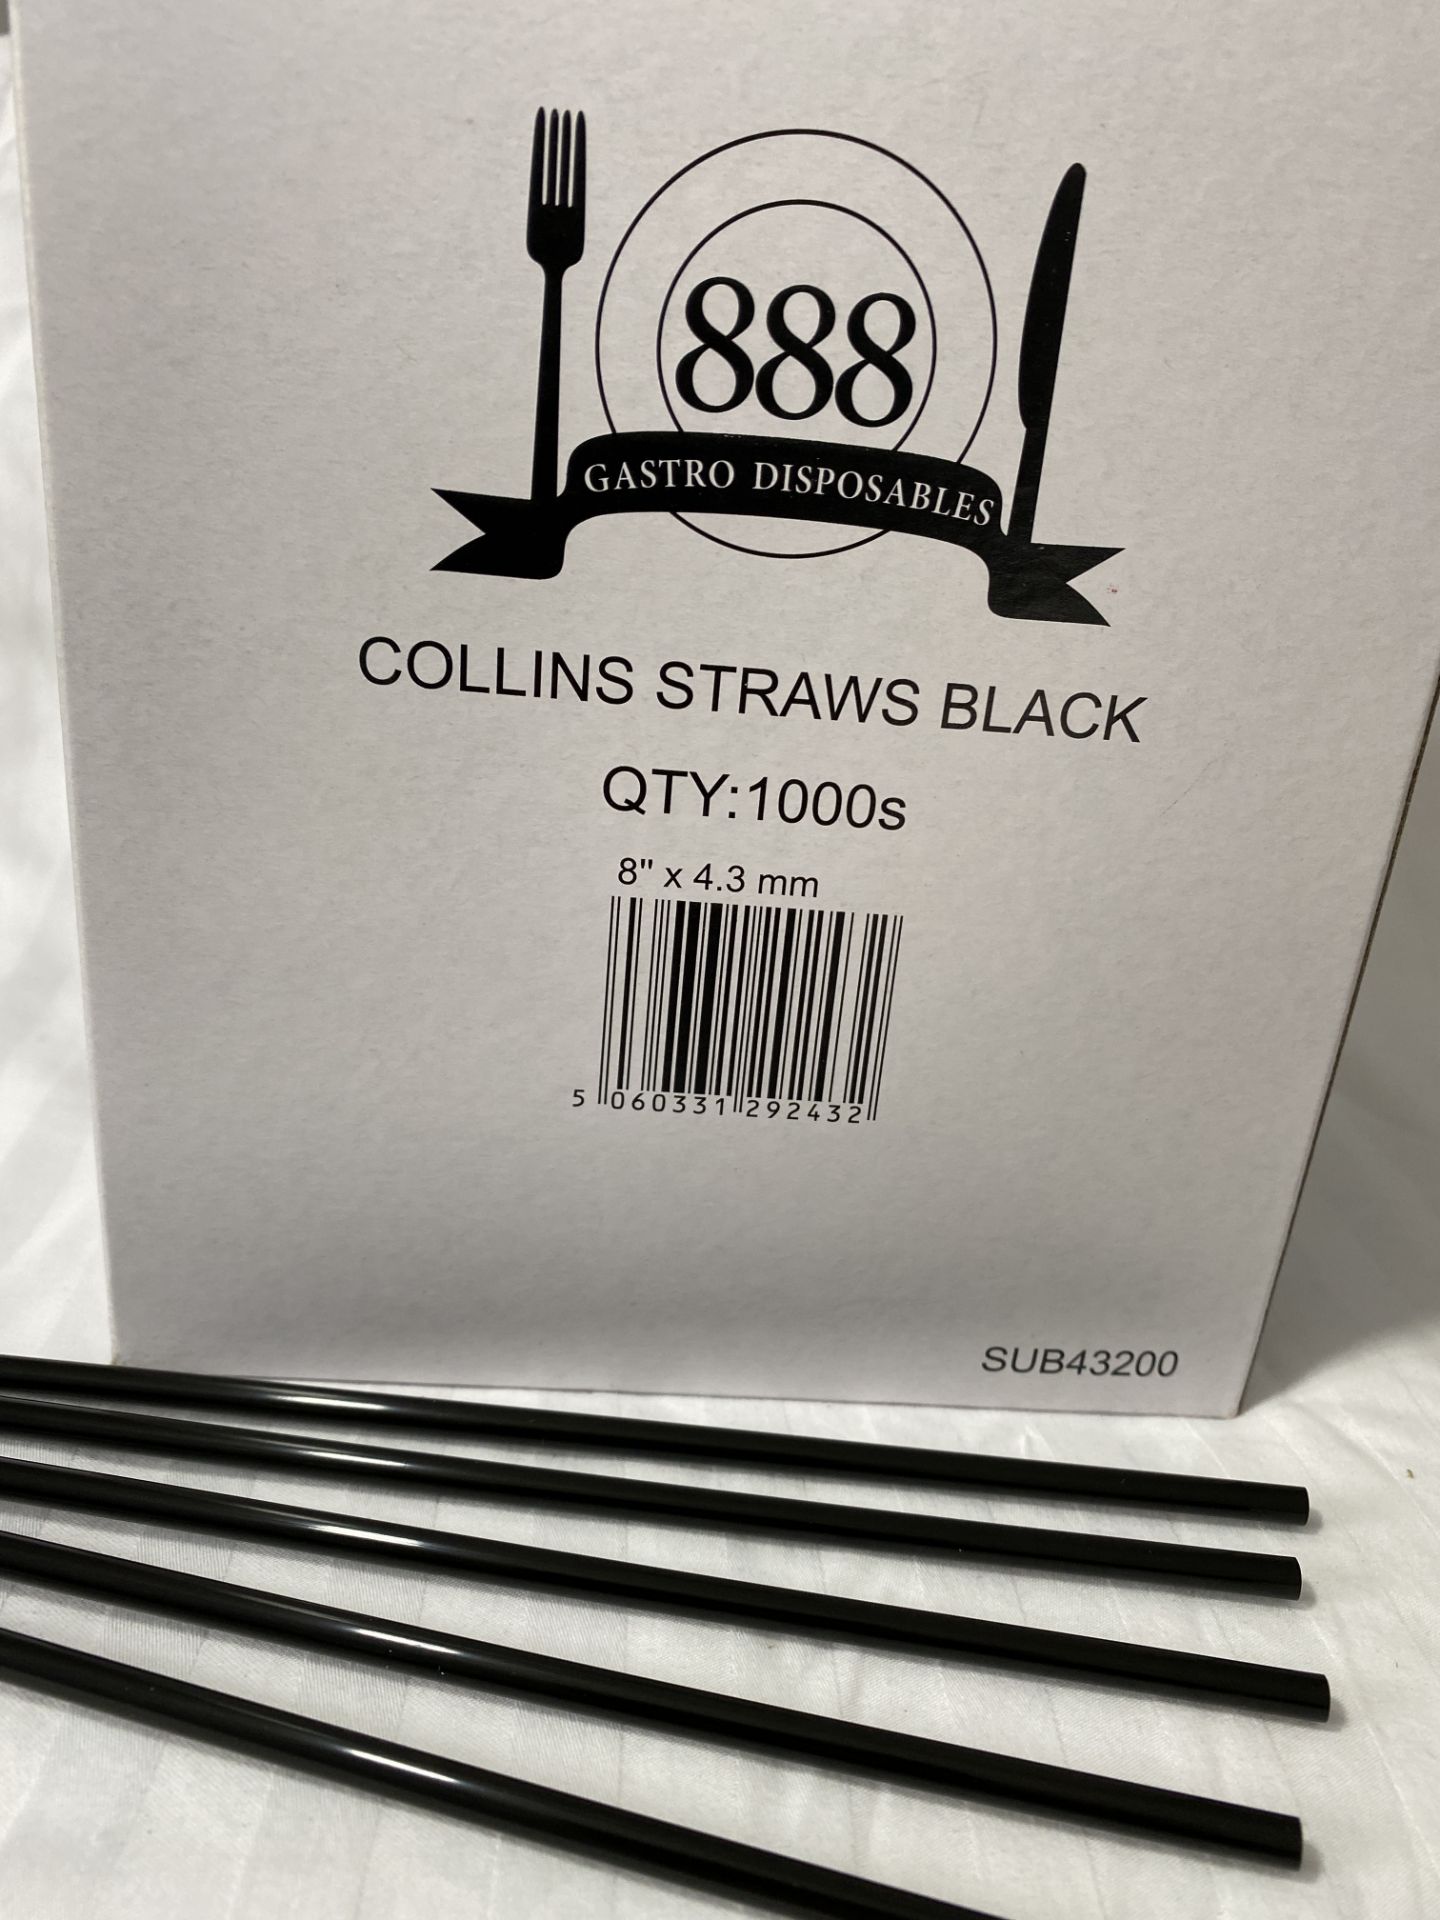 5 x Boxes of Collins Straws by 888 Gastro Disposables - Image 4 of 6